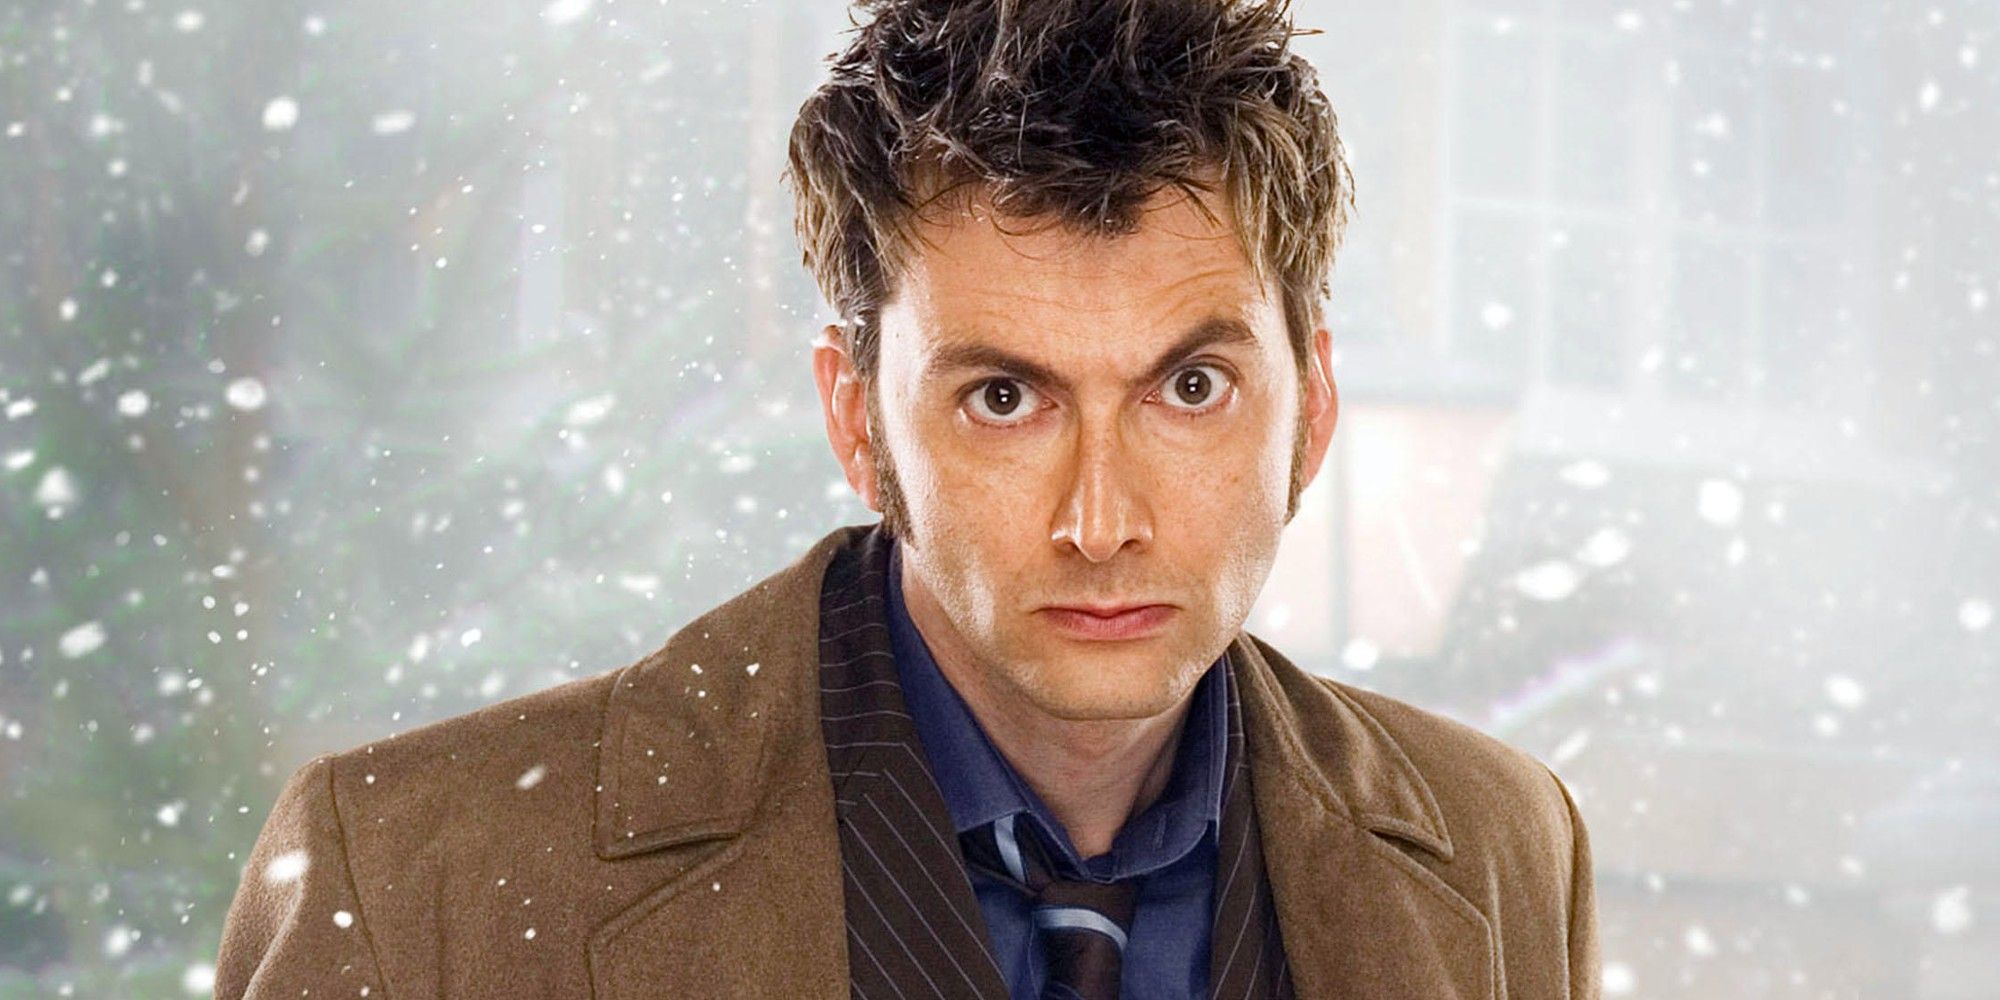 David Tennant as the 10th Doctor on Doctor Who